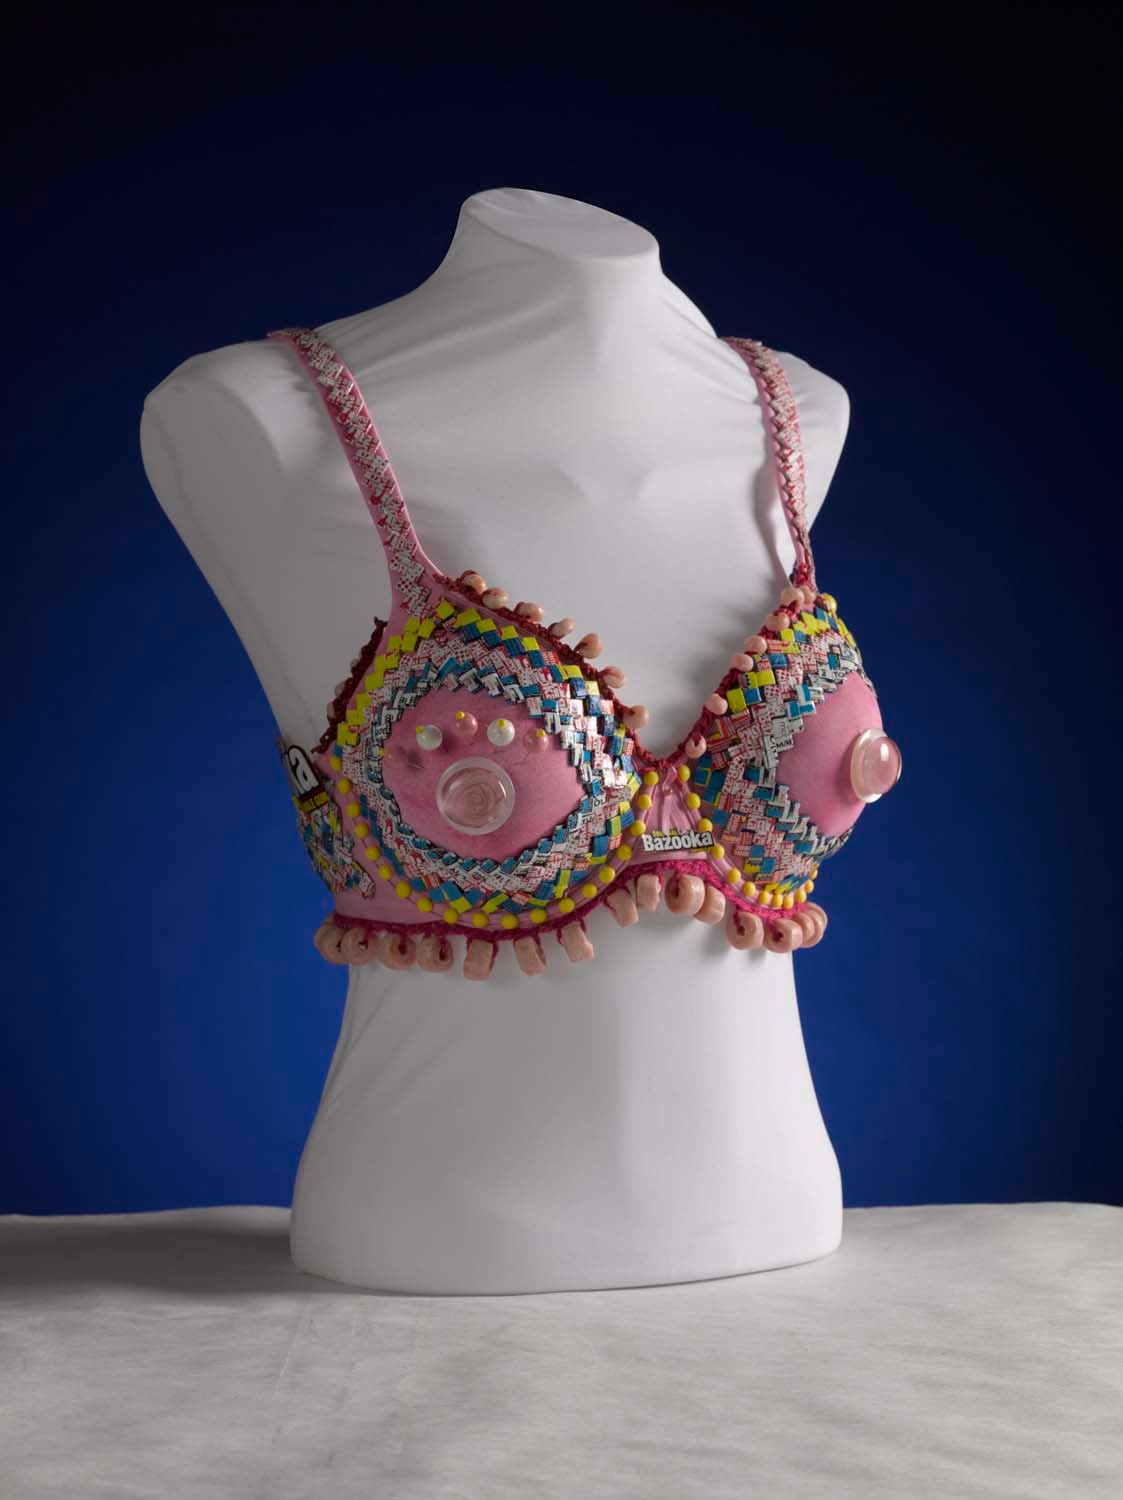 Unique bras – such as the Mardi Bra and the Bronx Bombers – up for auction  to fight breast cancer – New York Daily News